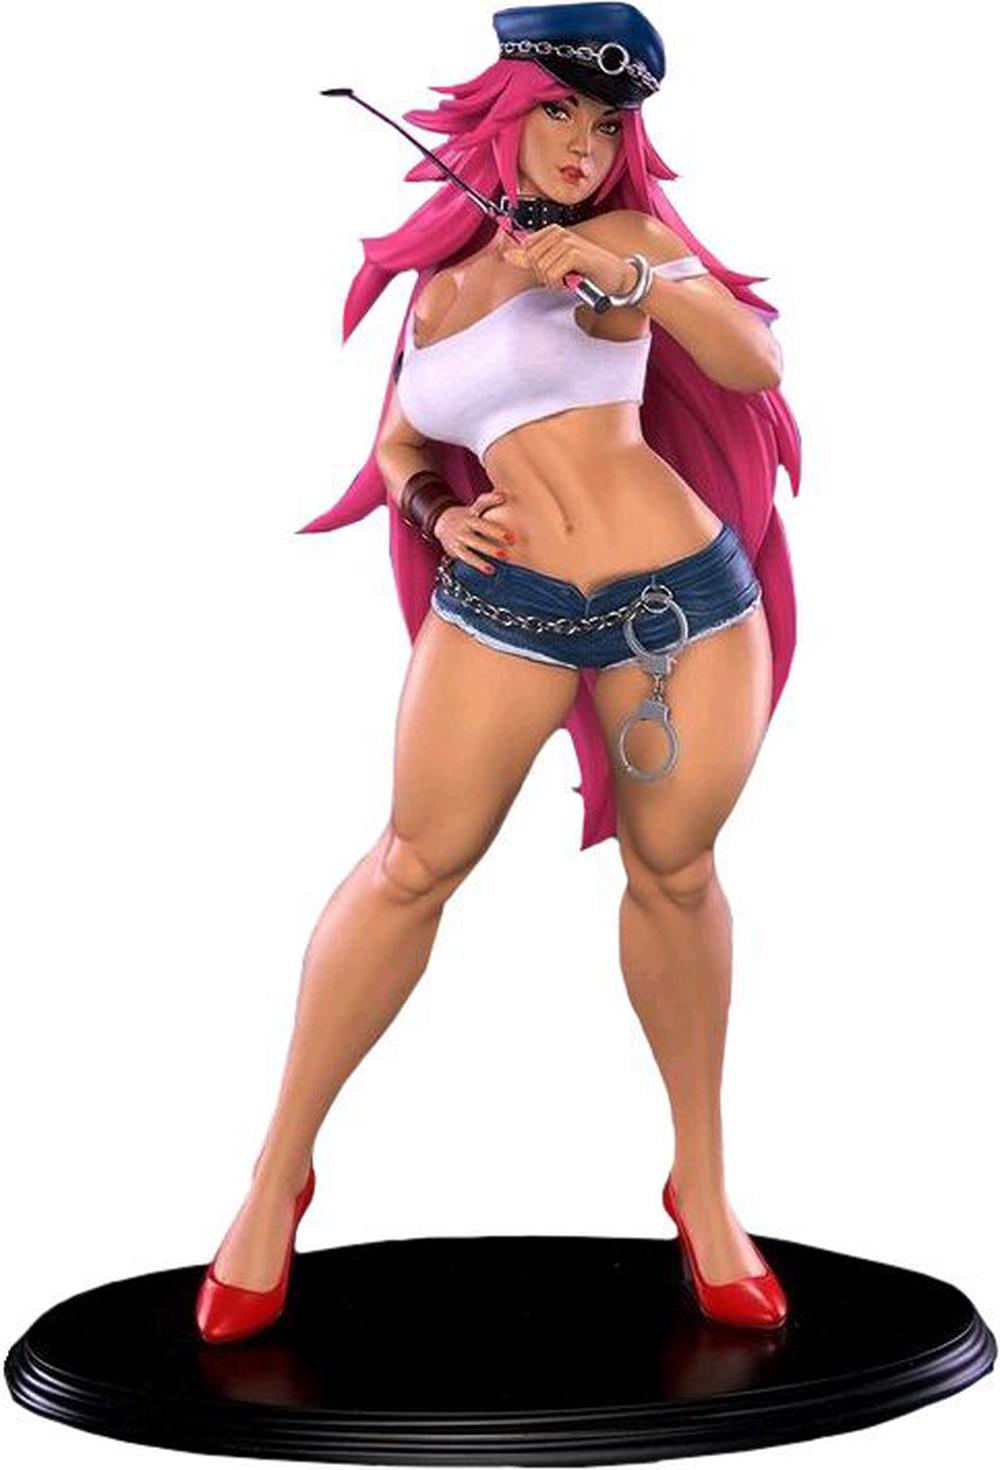 Street Fighter 4 Poison 14 Mixed Media Statue Pop Culture Shock Toys Free S 718117173103 Ebay 